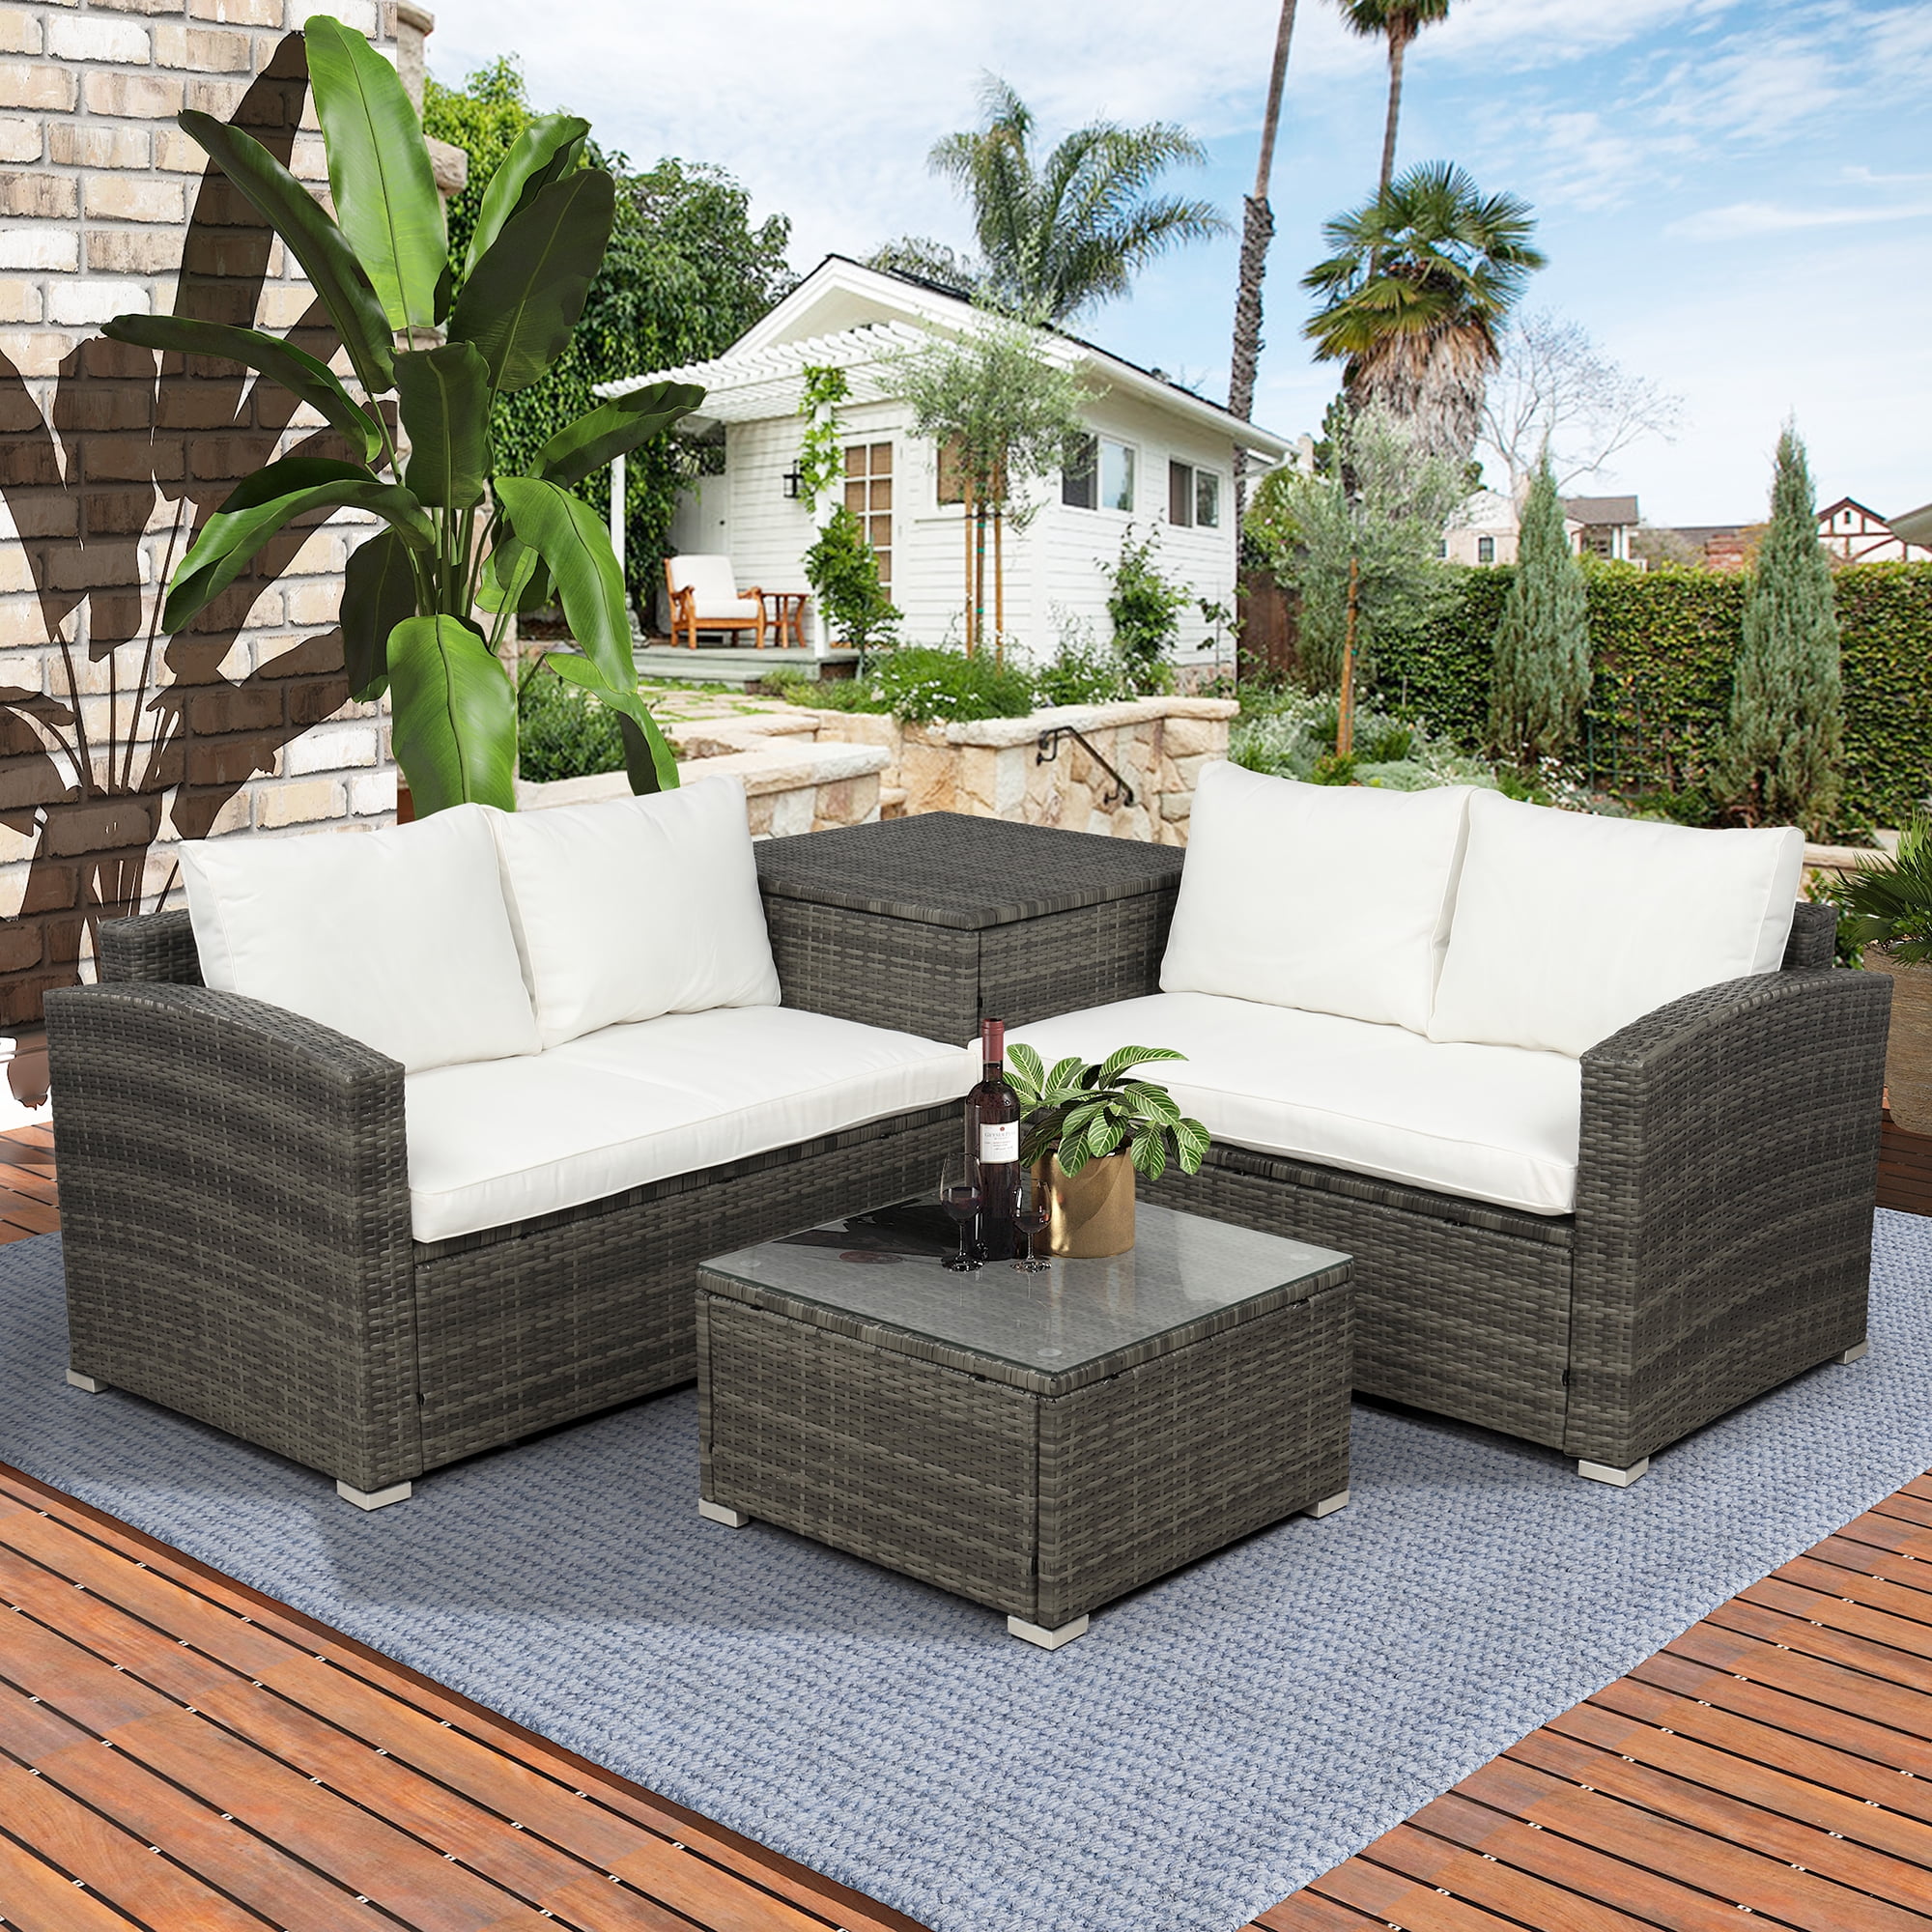 4-Piece Rattan Patio Furniture Sets, Wicker Bistro Patio Set with Ottoman,  Glass Coffee Table, Outdoor Cushioned PE Rattan Wicker Sectional Sofa Set,  